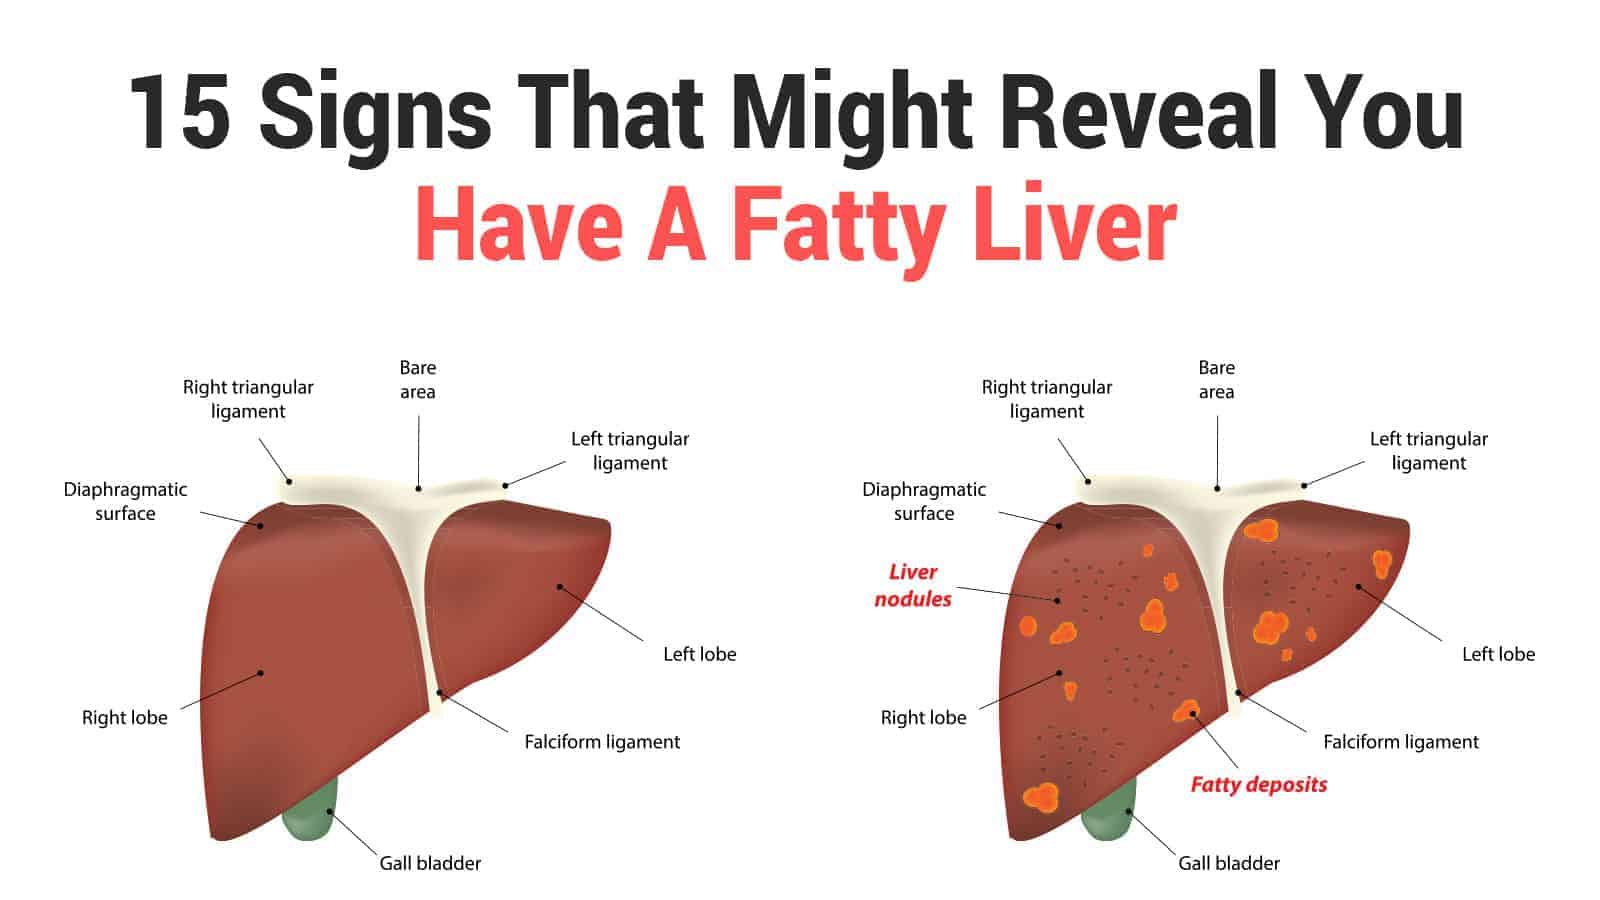 15 Signs That Might Reveal You Have A Fatty Liver